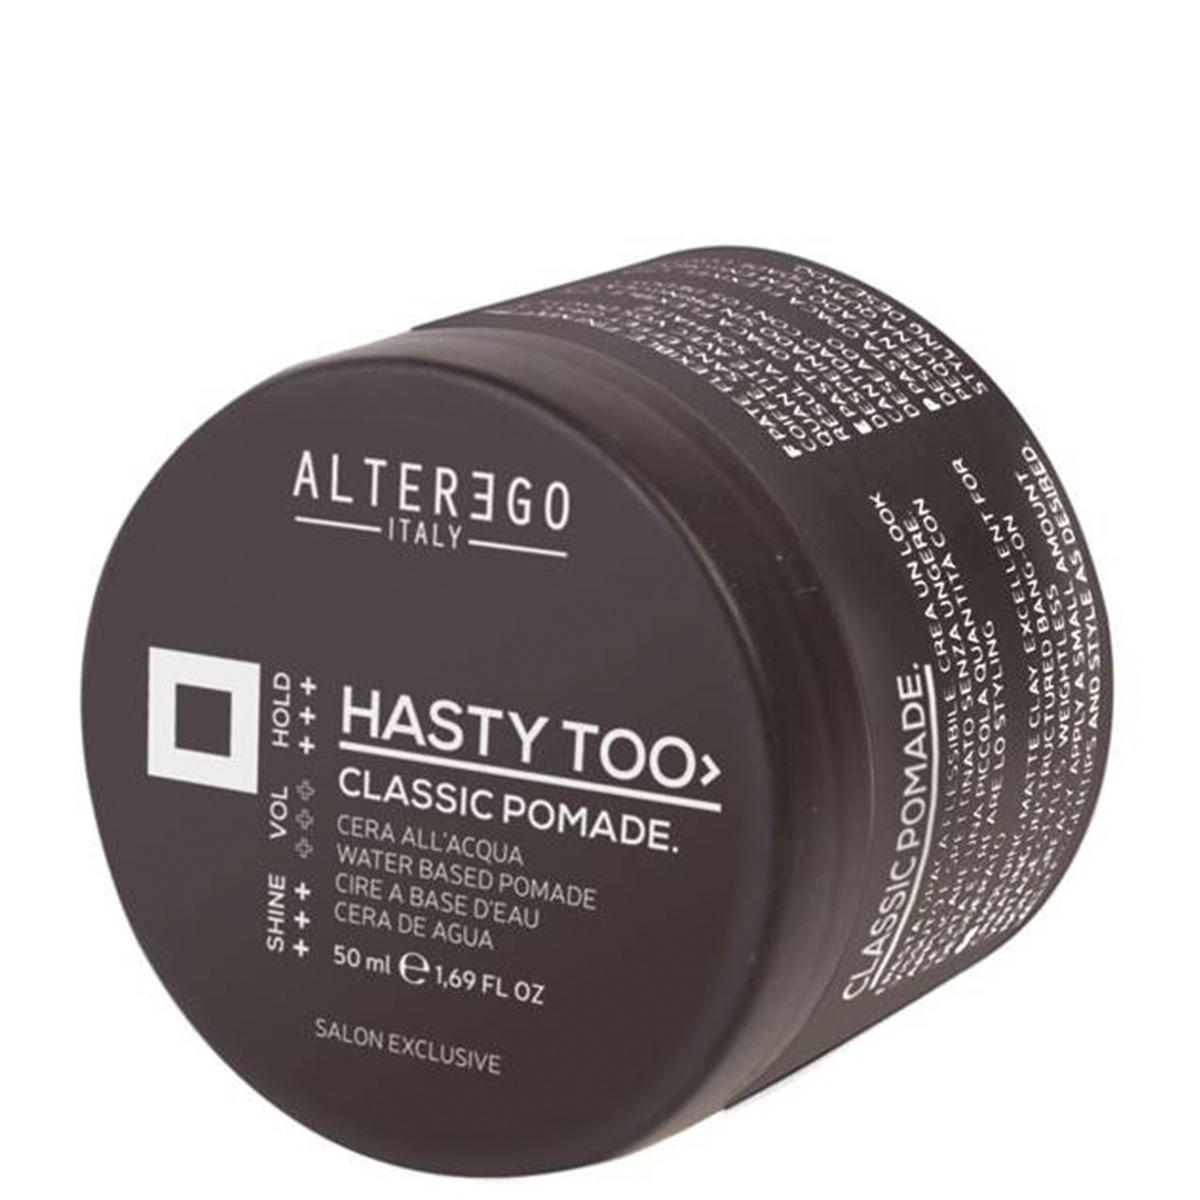 ALTER EGO Hasty Too Classic Pomade 50 ml - 1